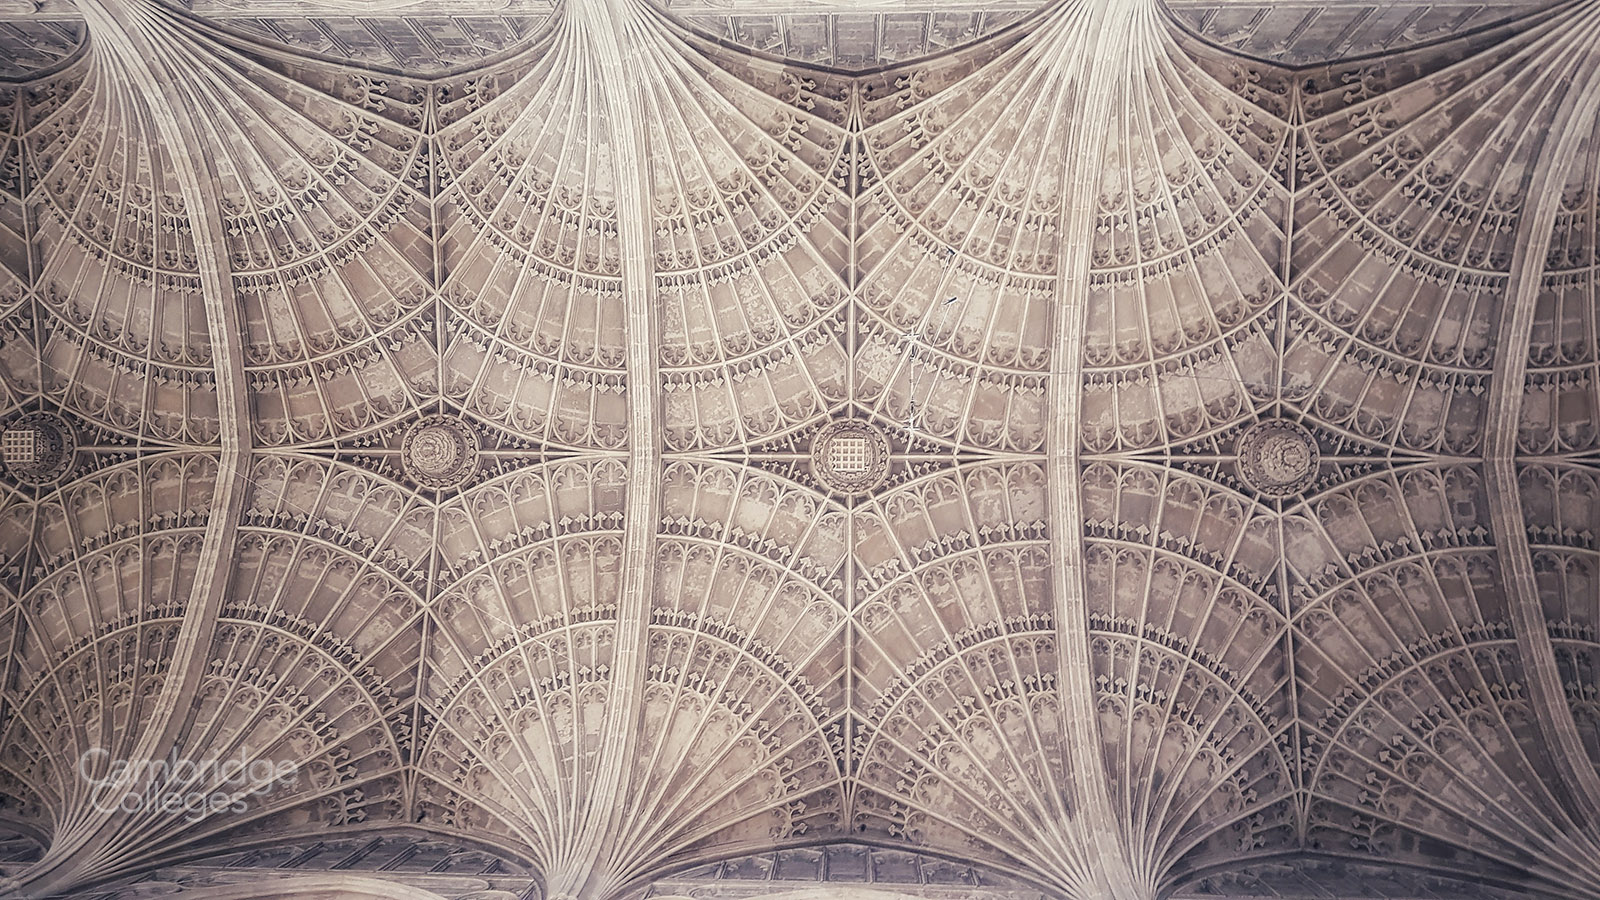 The fan vaulted ceiling of King's college chapel, Cambridge